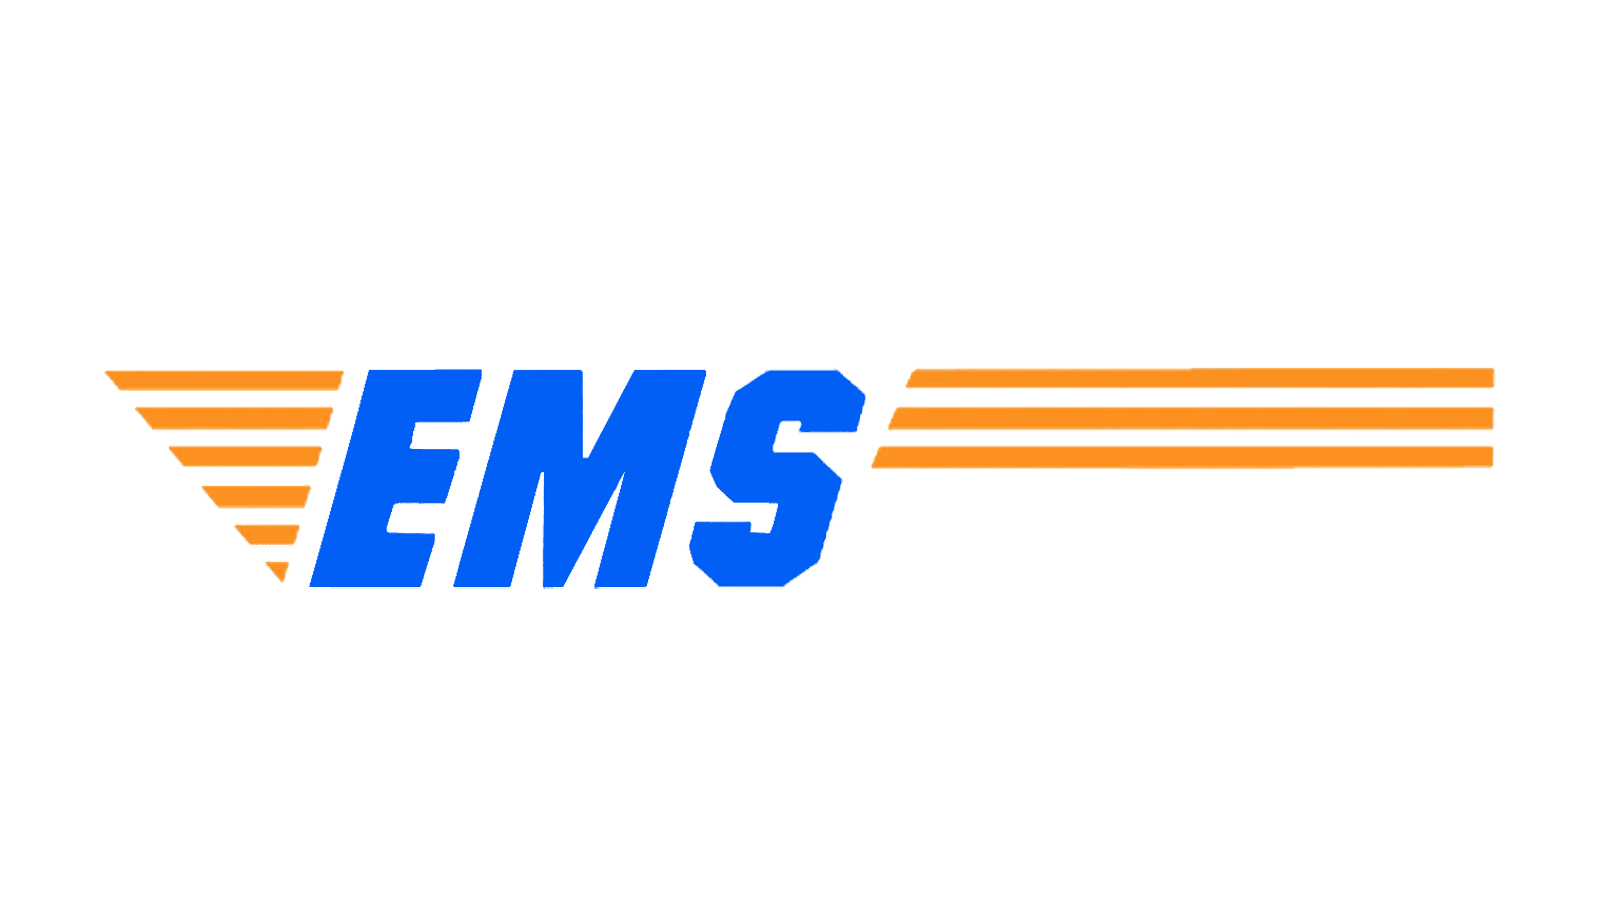 EMS International Shipping with tracking ( A, D, BE, NL, LUX, SK, CZ, PL, SLO, HR, RO )